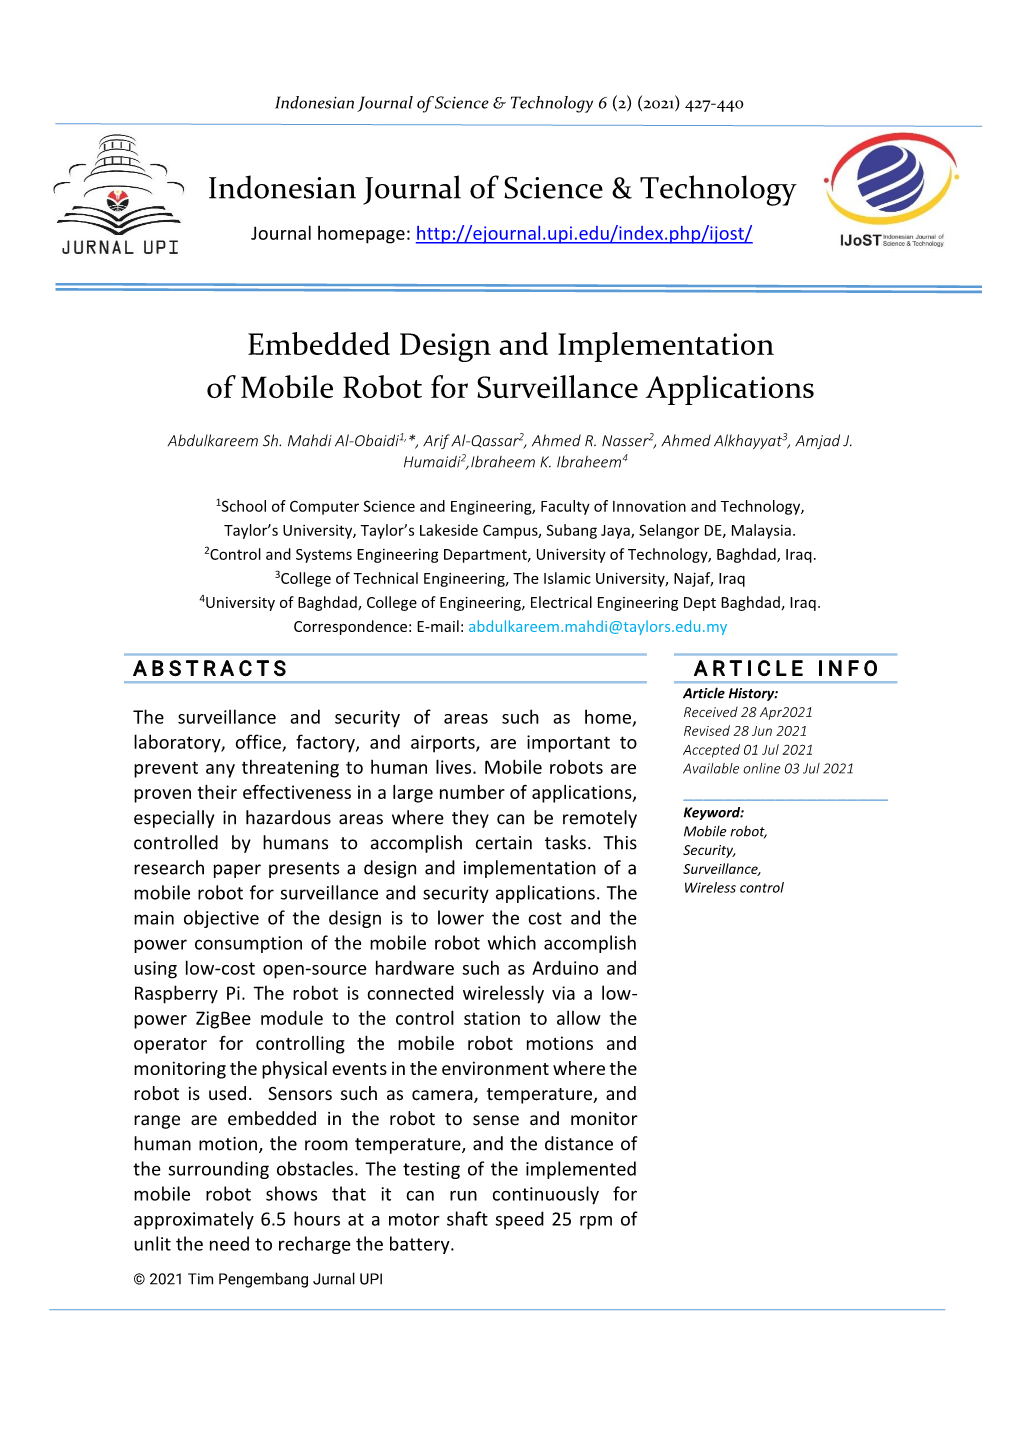 Embedded Design and Implementation of Mobile Robot for Surveillance Applications